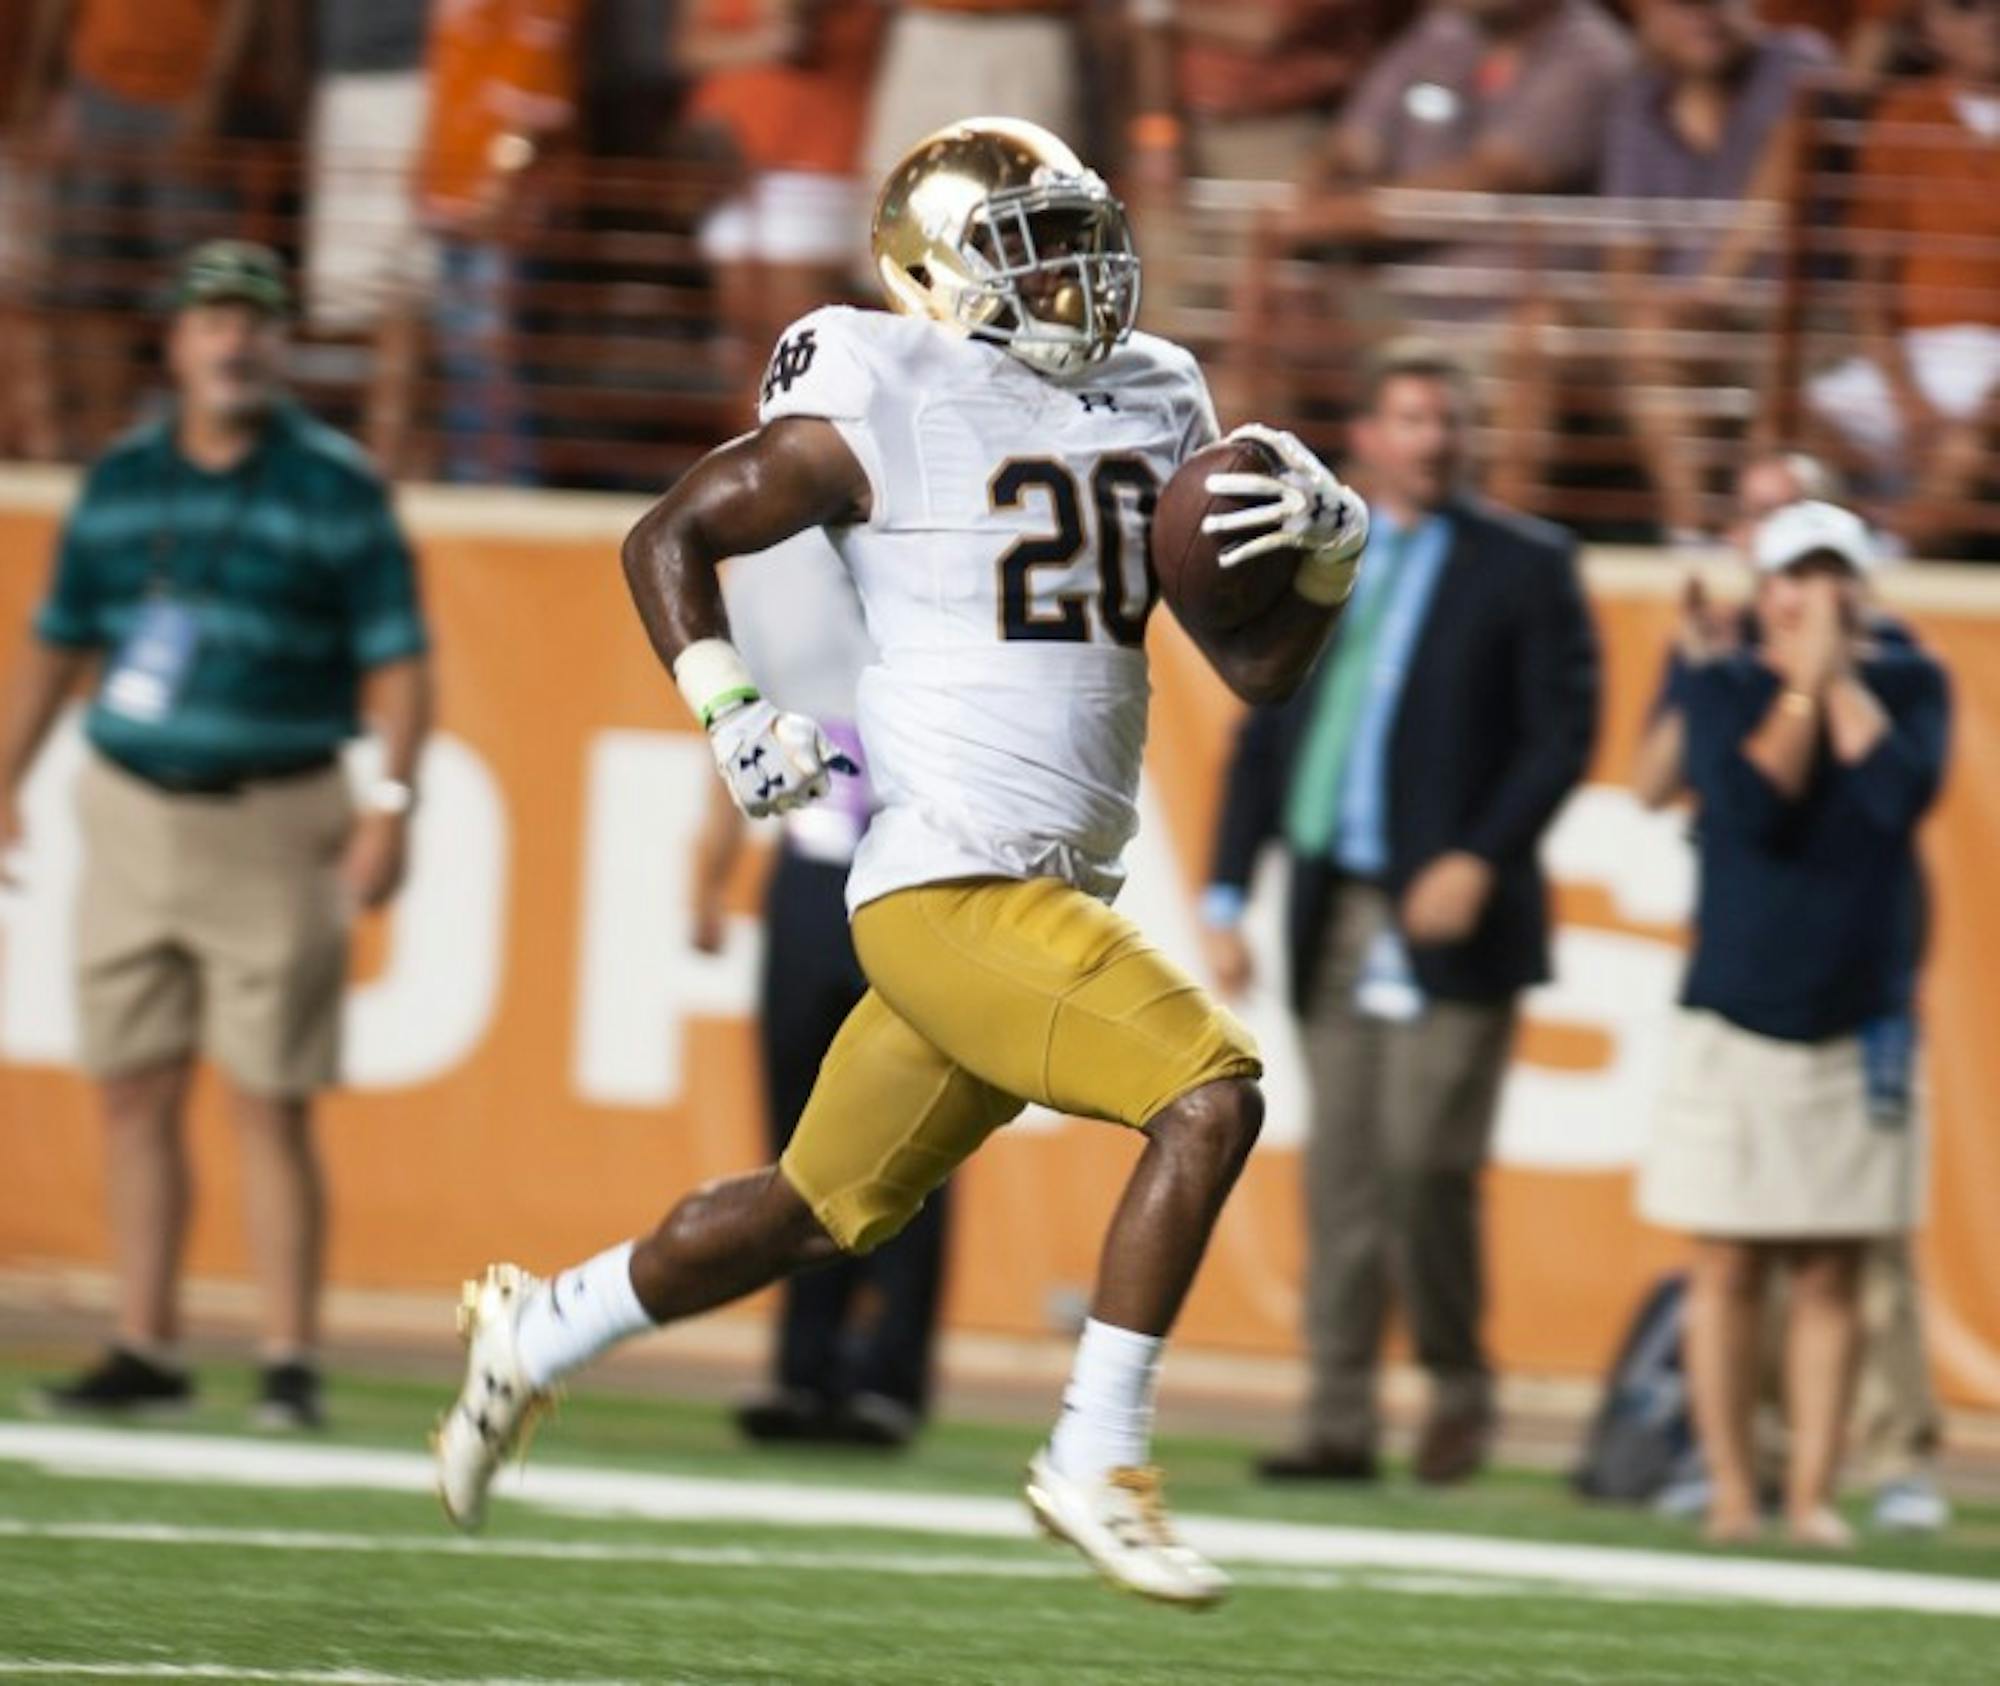 Irish sophomore cornerback Shaun Crawford carries the ball during Notre Dame's 50-47 loss to Texas on Sept. 4. Brian Kelly announced that Crawford will not play for the rest of the season due to an ACL injury.